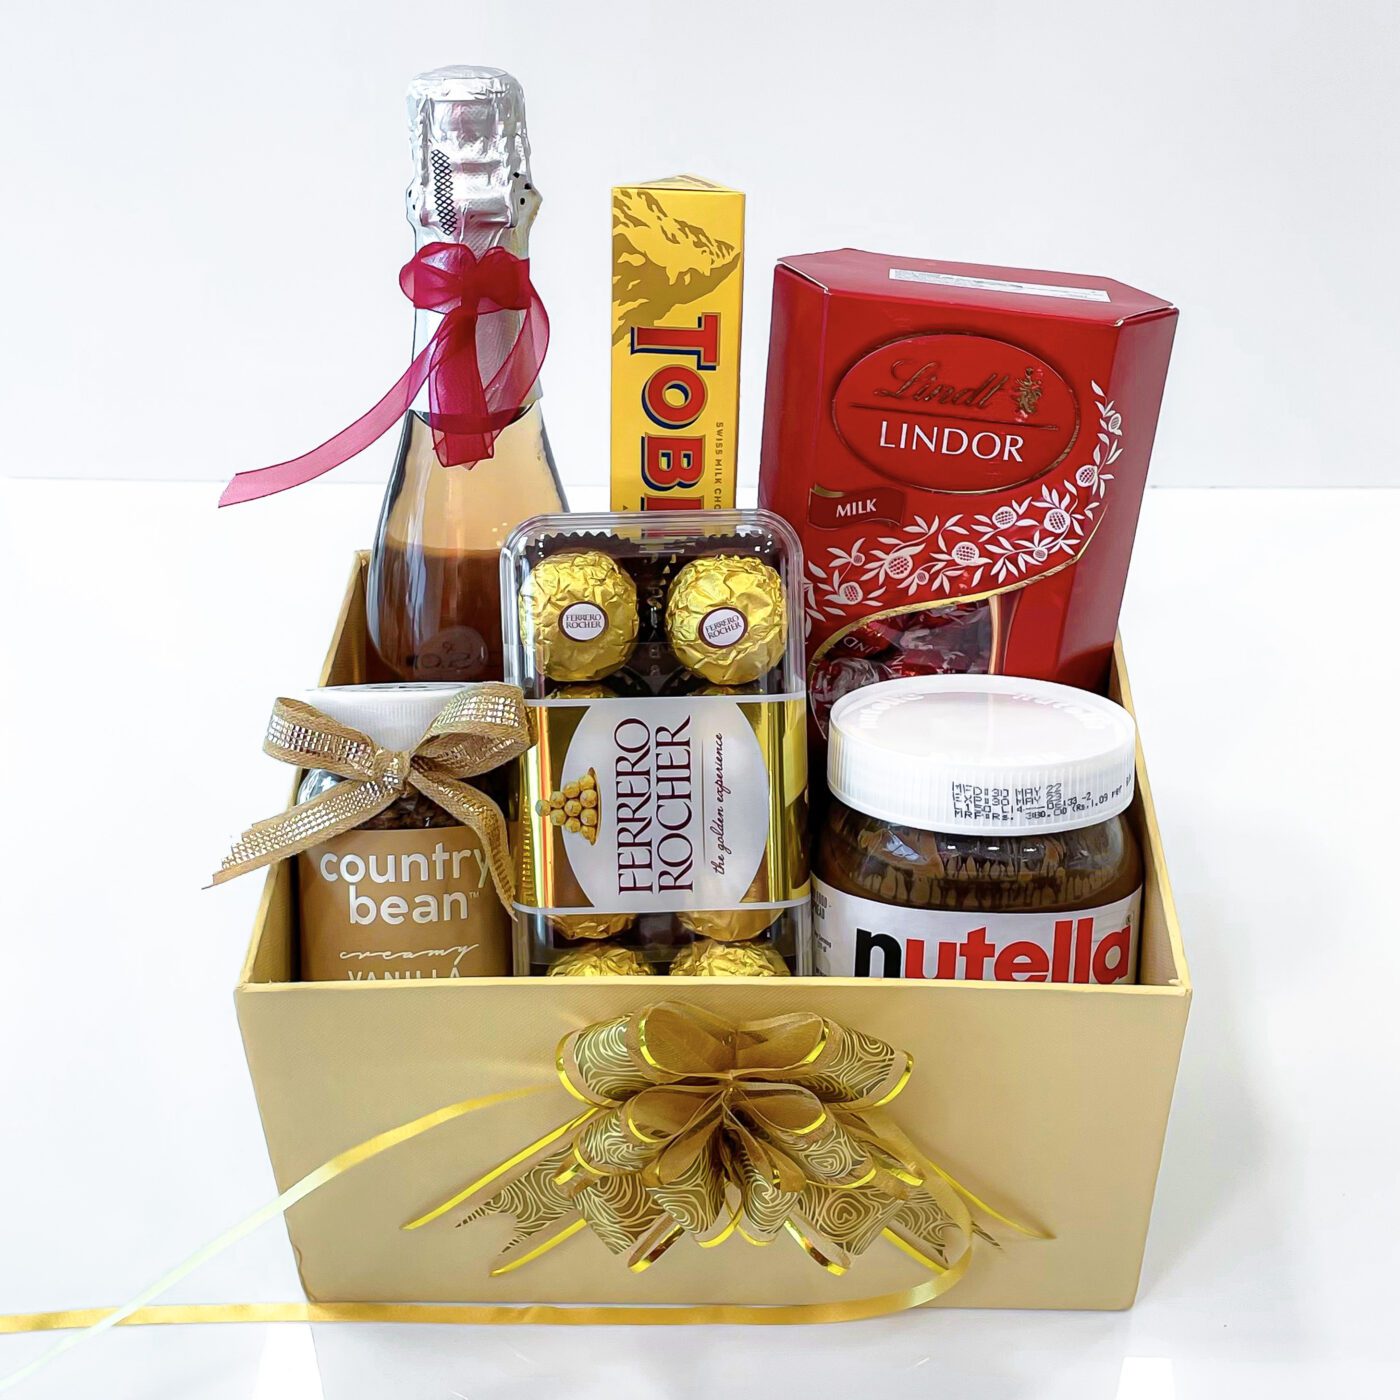 Ghasitaram Gifts Jaiccha Mother's Day - Diwali - Jumbo Wooden Basket Hamper  of 40 Goodies |Diwali,Holi,Valentine,Birthday,Anniversary,Gift for Her,Him,Mothers  Day,Fathers Day| : Amazon.in: Grocery & Gourmet Foods